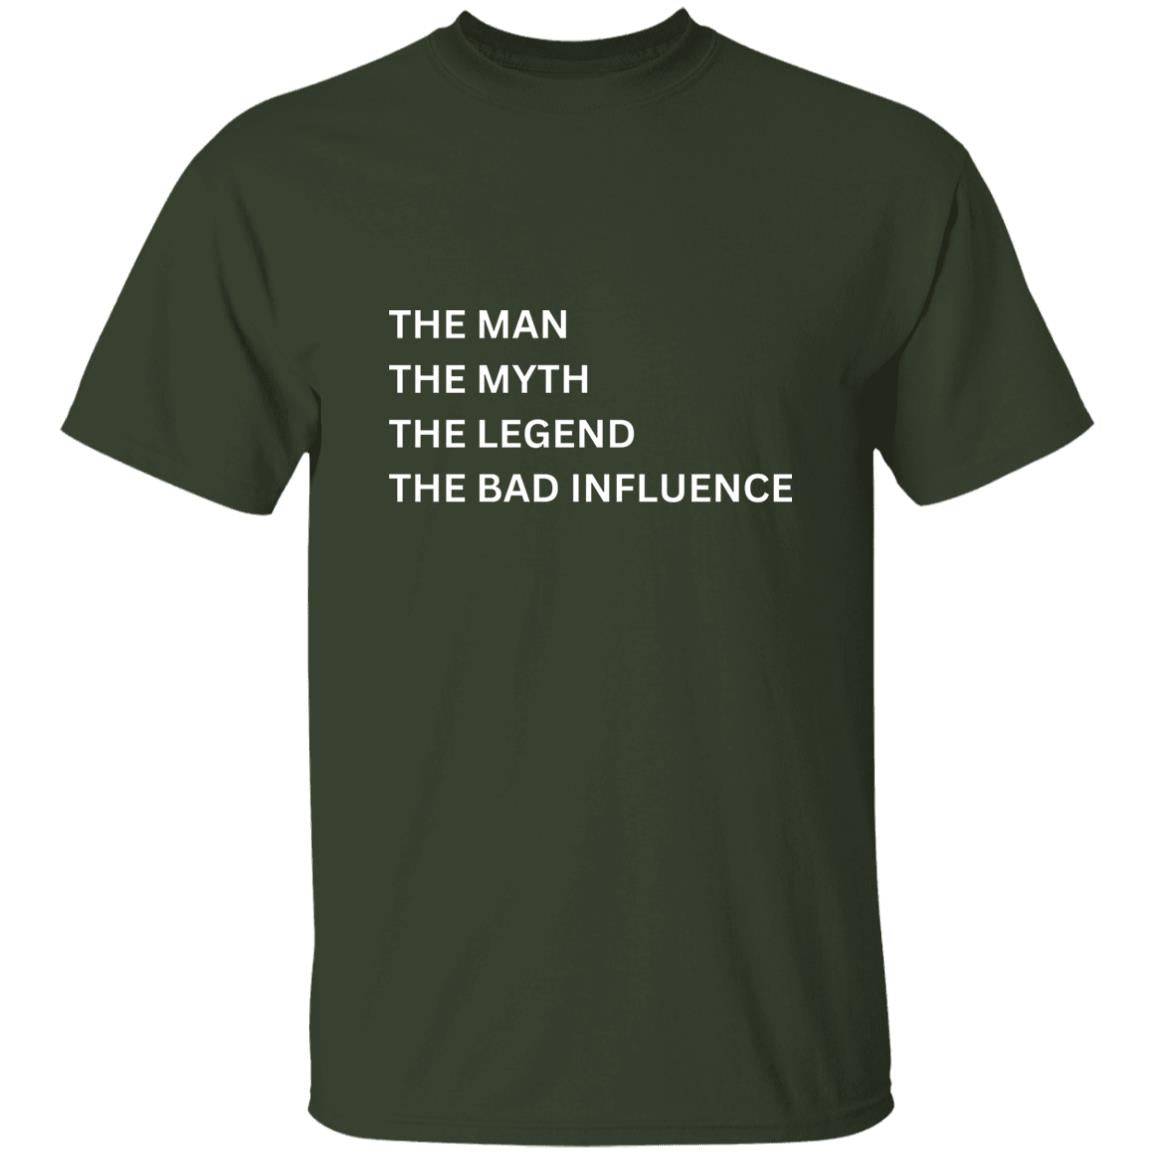 Front of the military green Man, Myth, Legend t-shirt. Material is heavyweight 100% cotton in a classic unisex t-shirt style. Printed in white letters on the chest in a list-style is the phrase: "THE MAN, THE MYTH, THE LEGEND, THE BAD INFLUENCE"